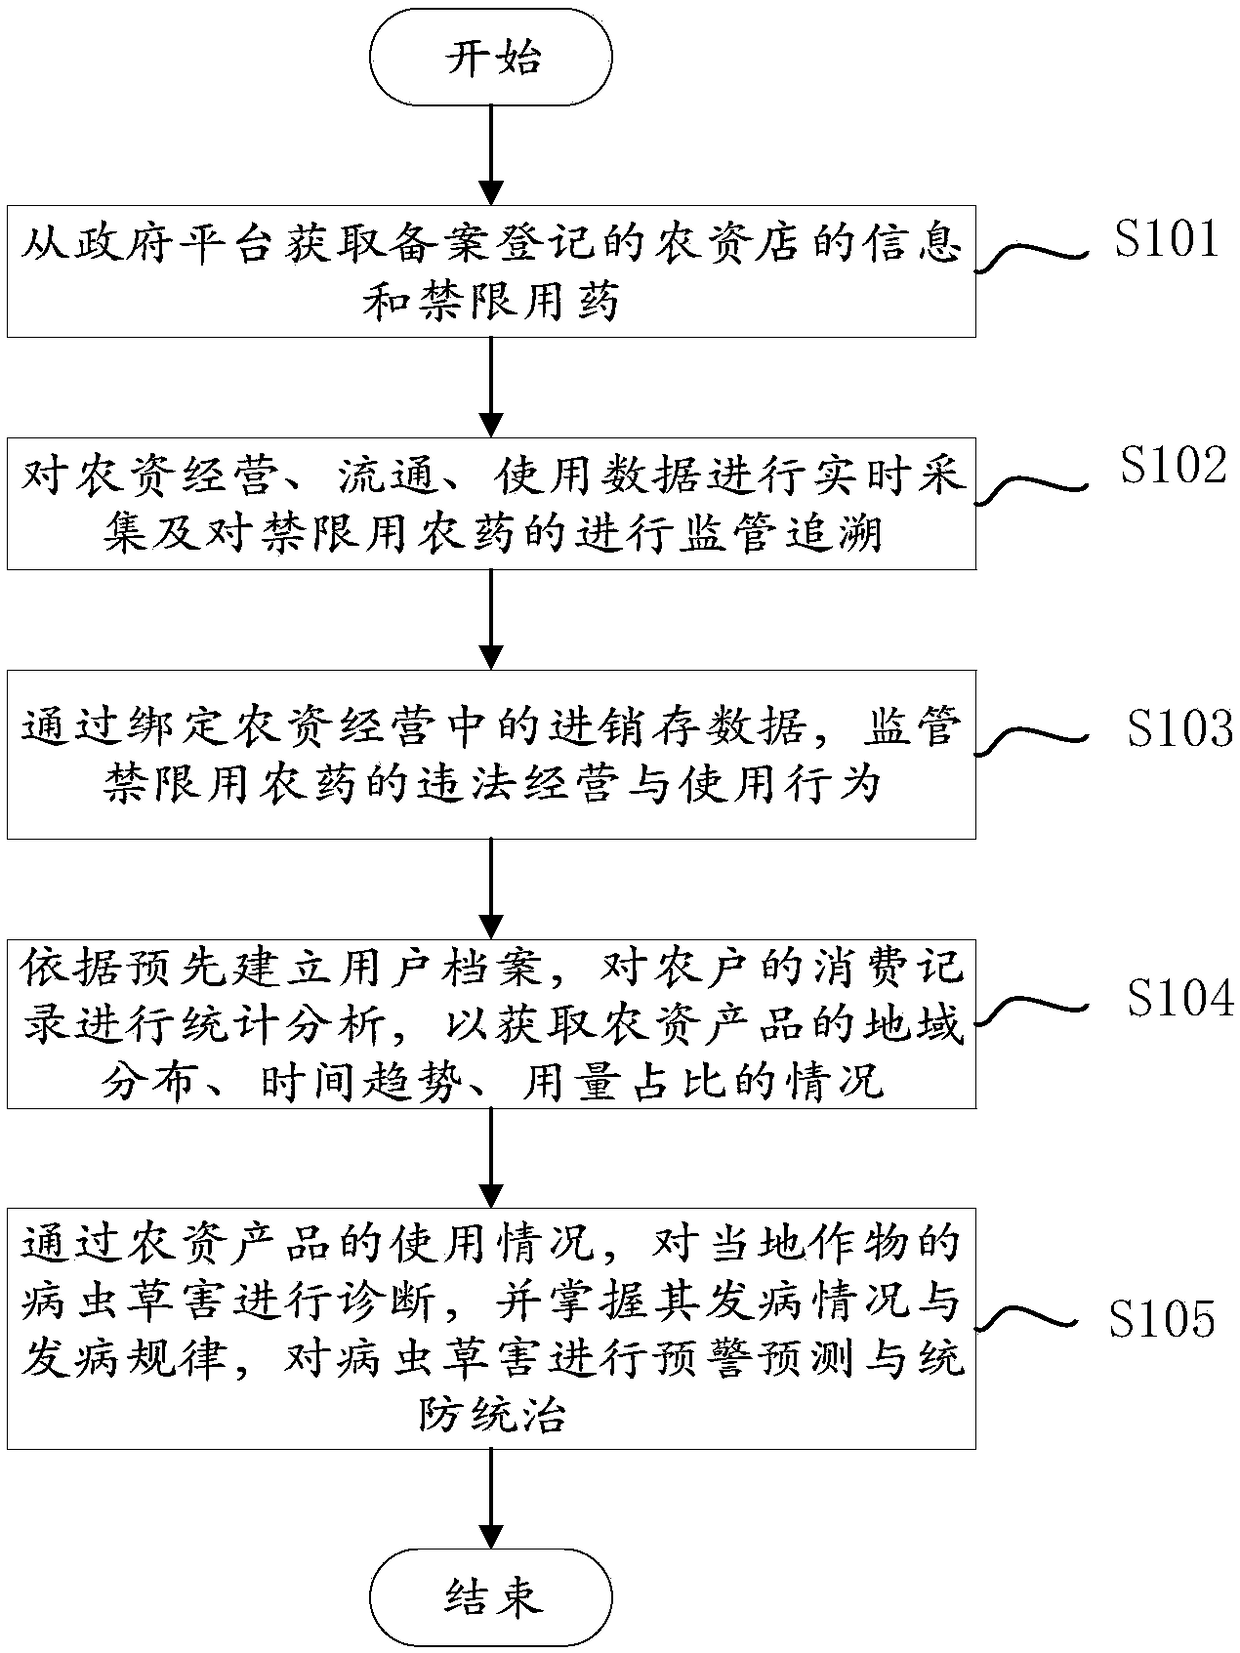 Supervision method and system for agricultural means of production